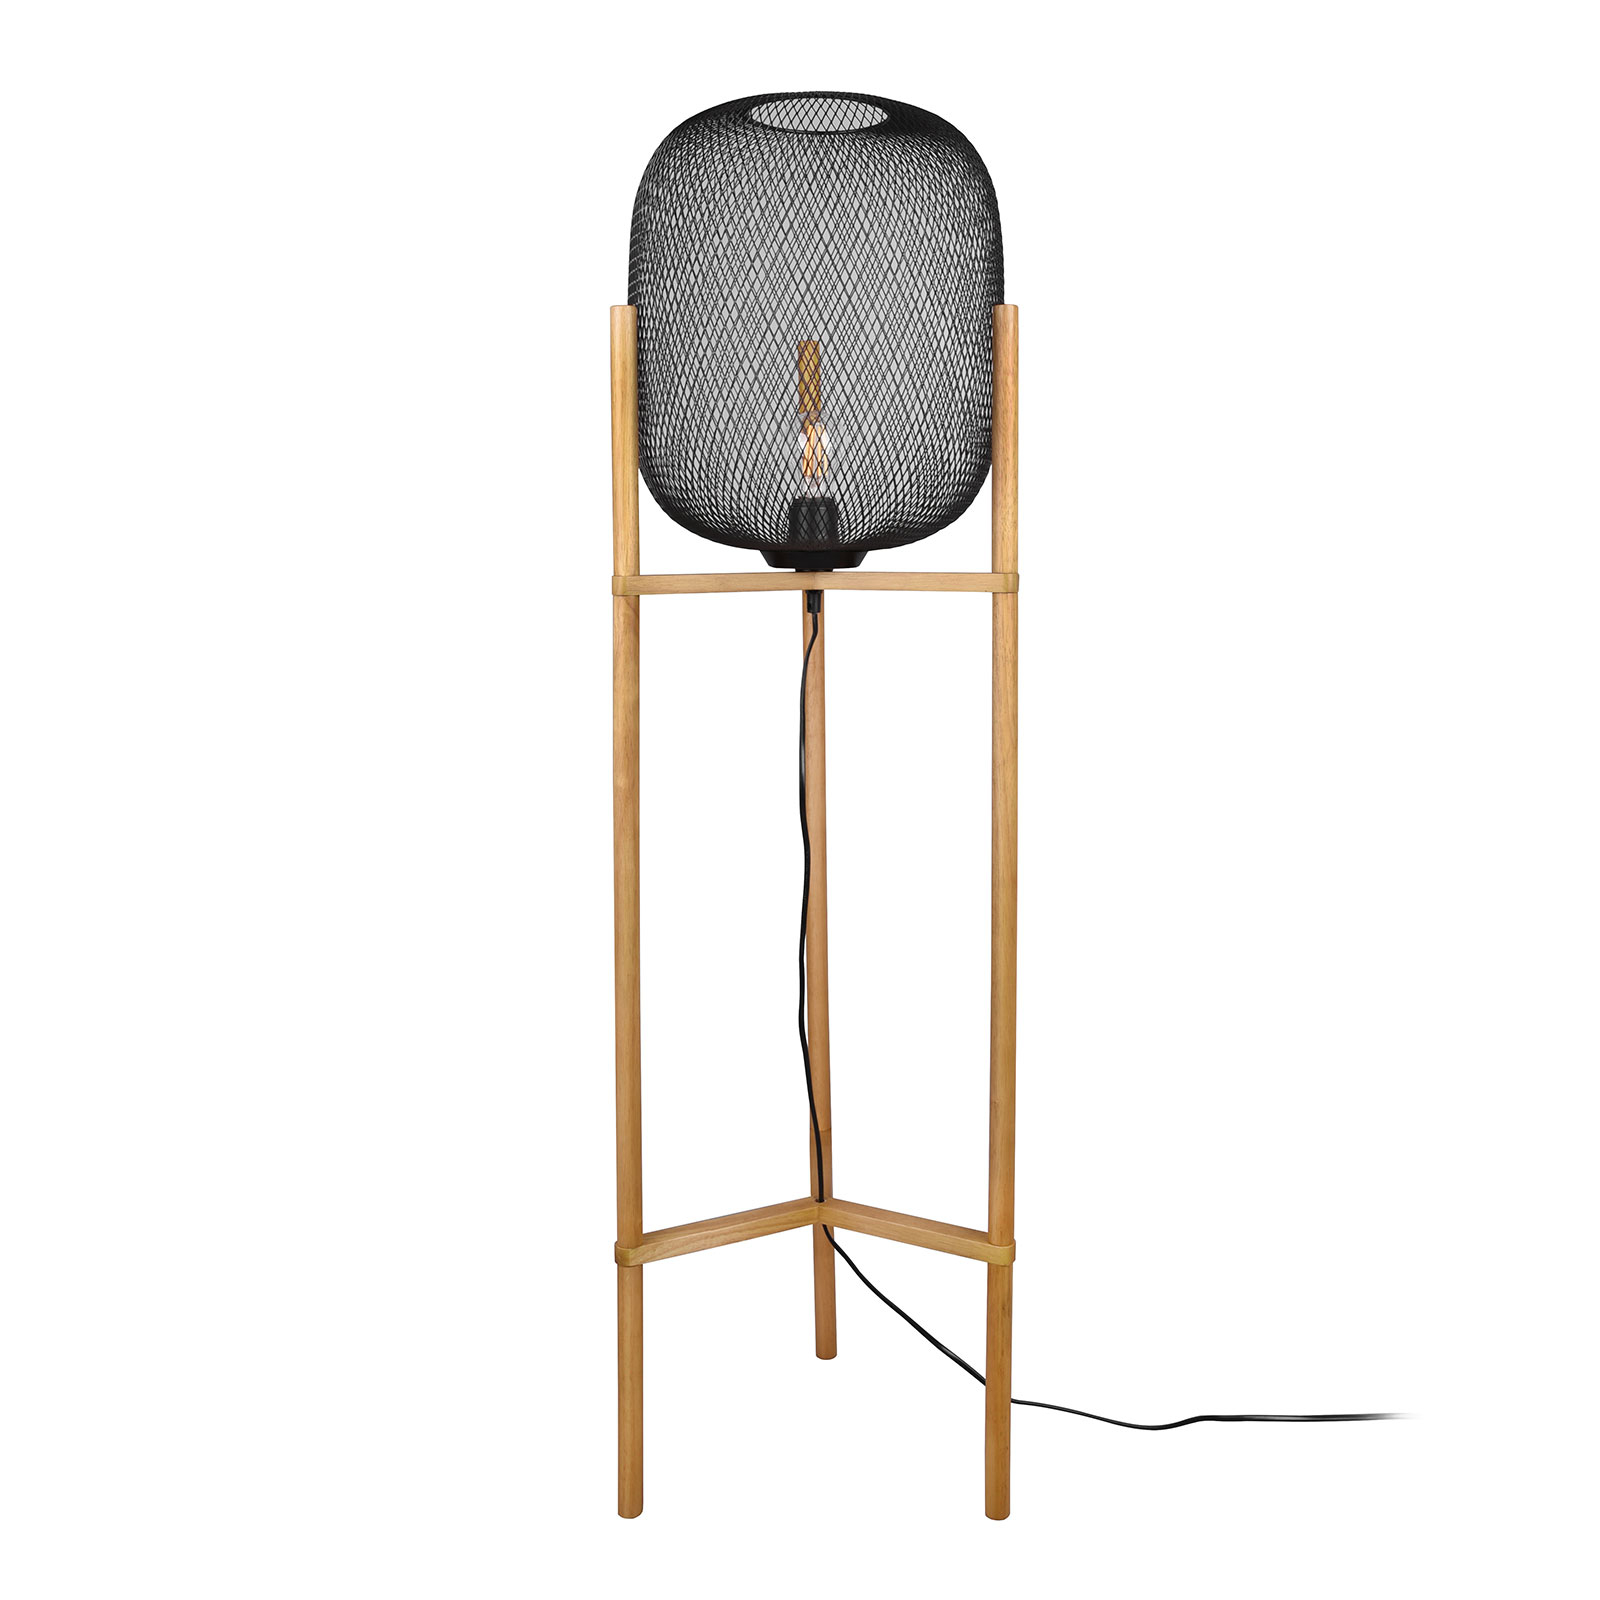 Calimero floor lamp with a tripod wooden frame